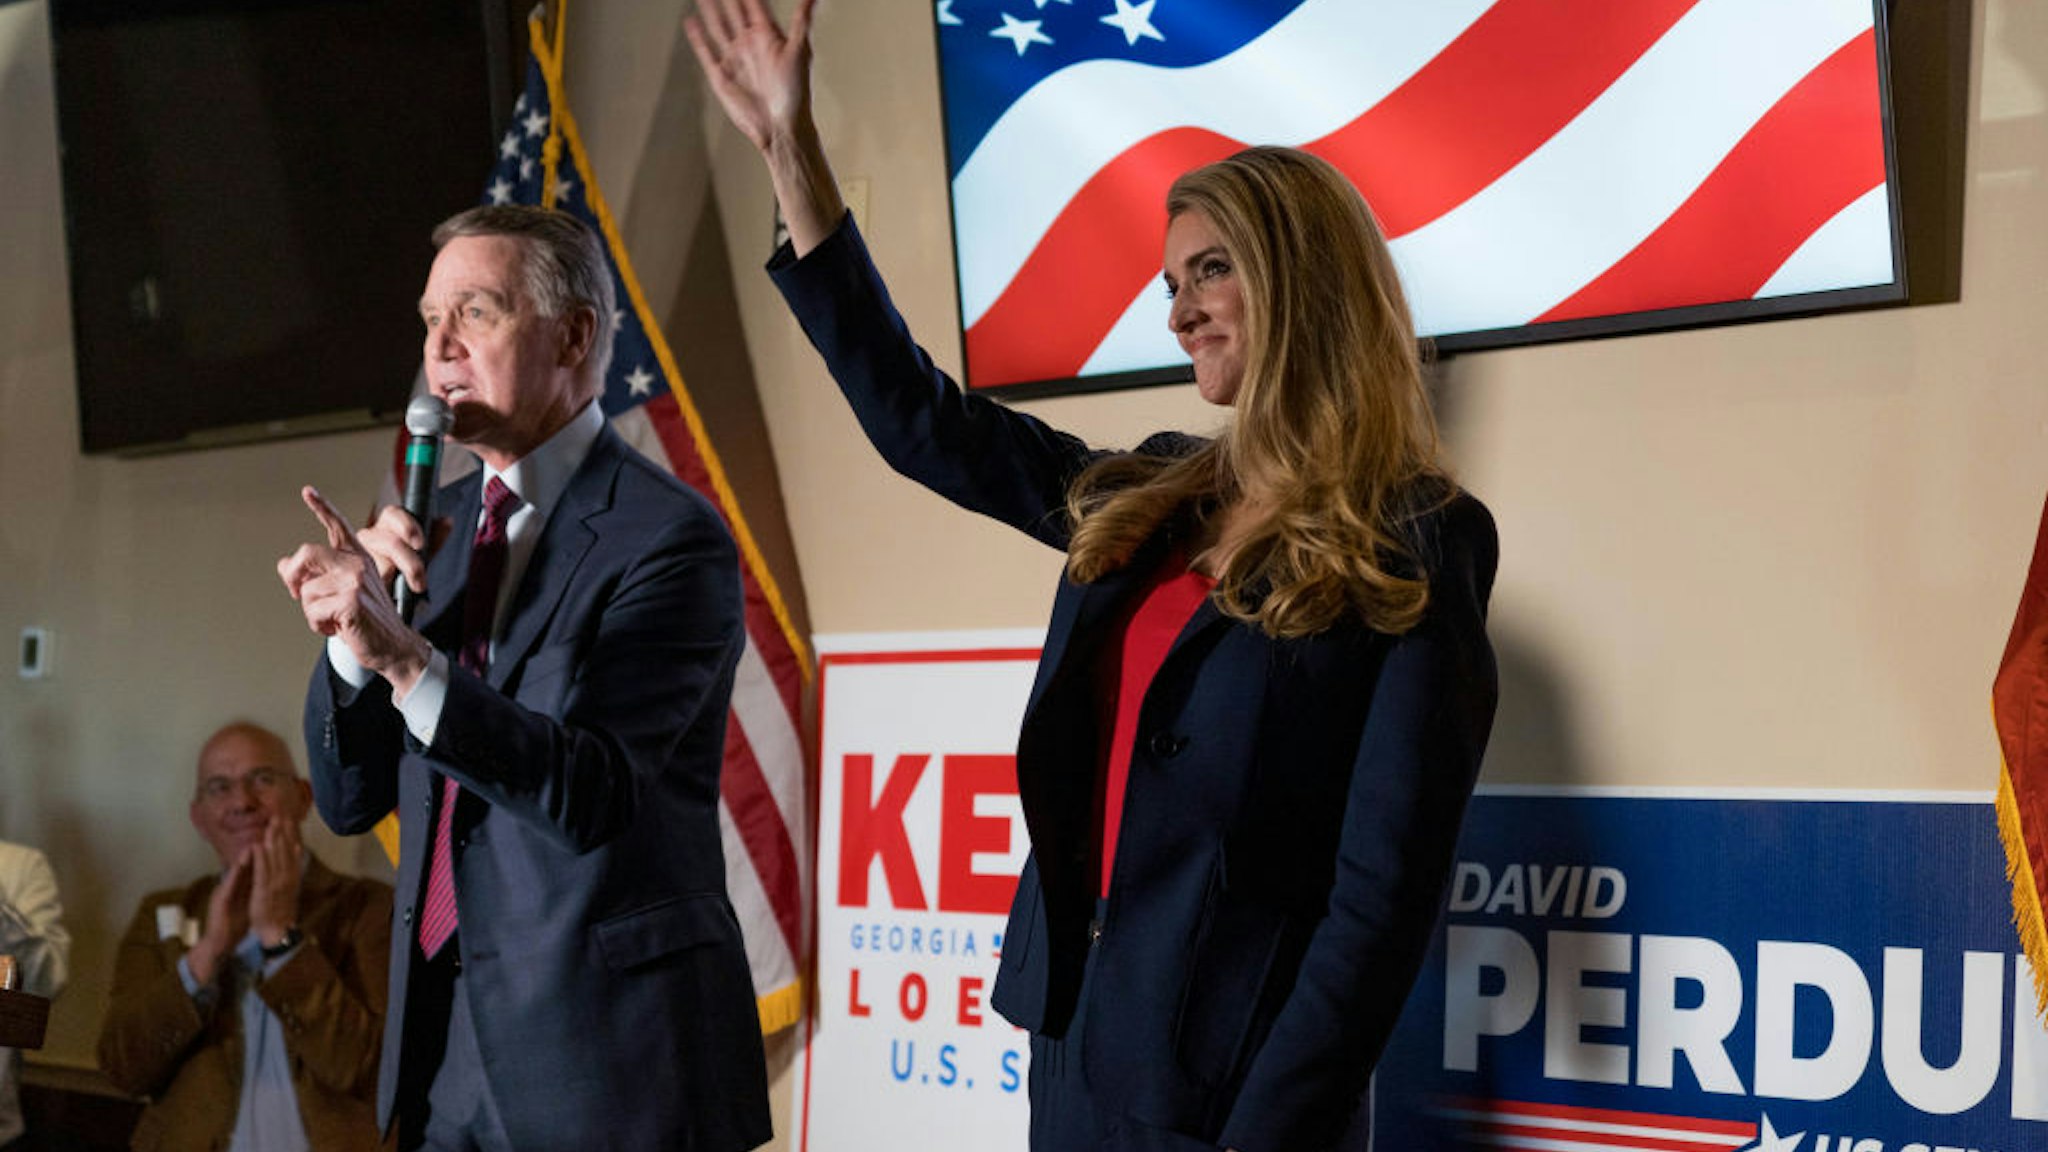 U.S. Sen David Perdue (R-GA) and Sen Kelly Loeffler (R-GA) speaks at a campaign event to supporters at a restaurant on November 13, 2020 in Cumming, Georgia.